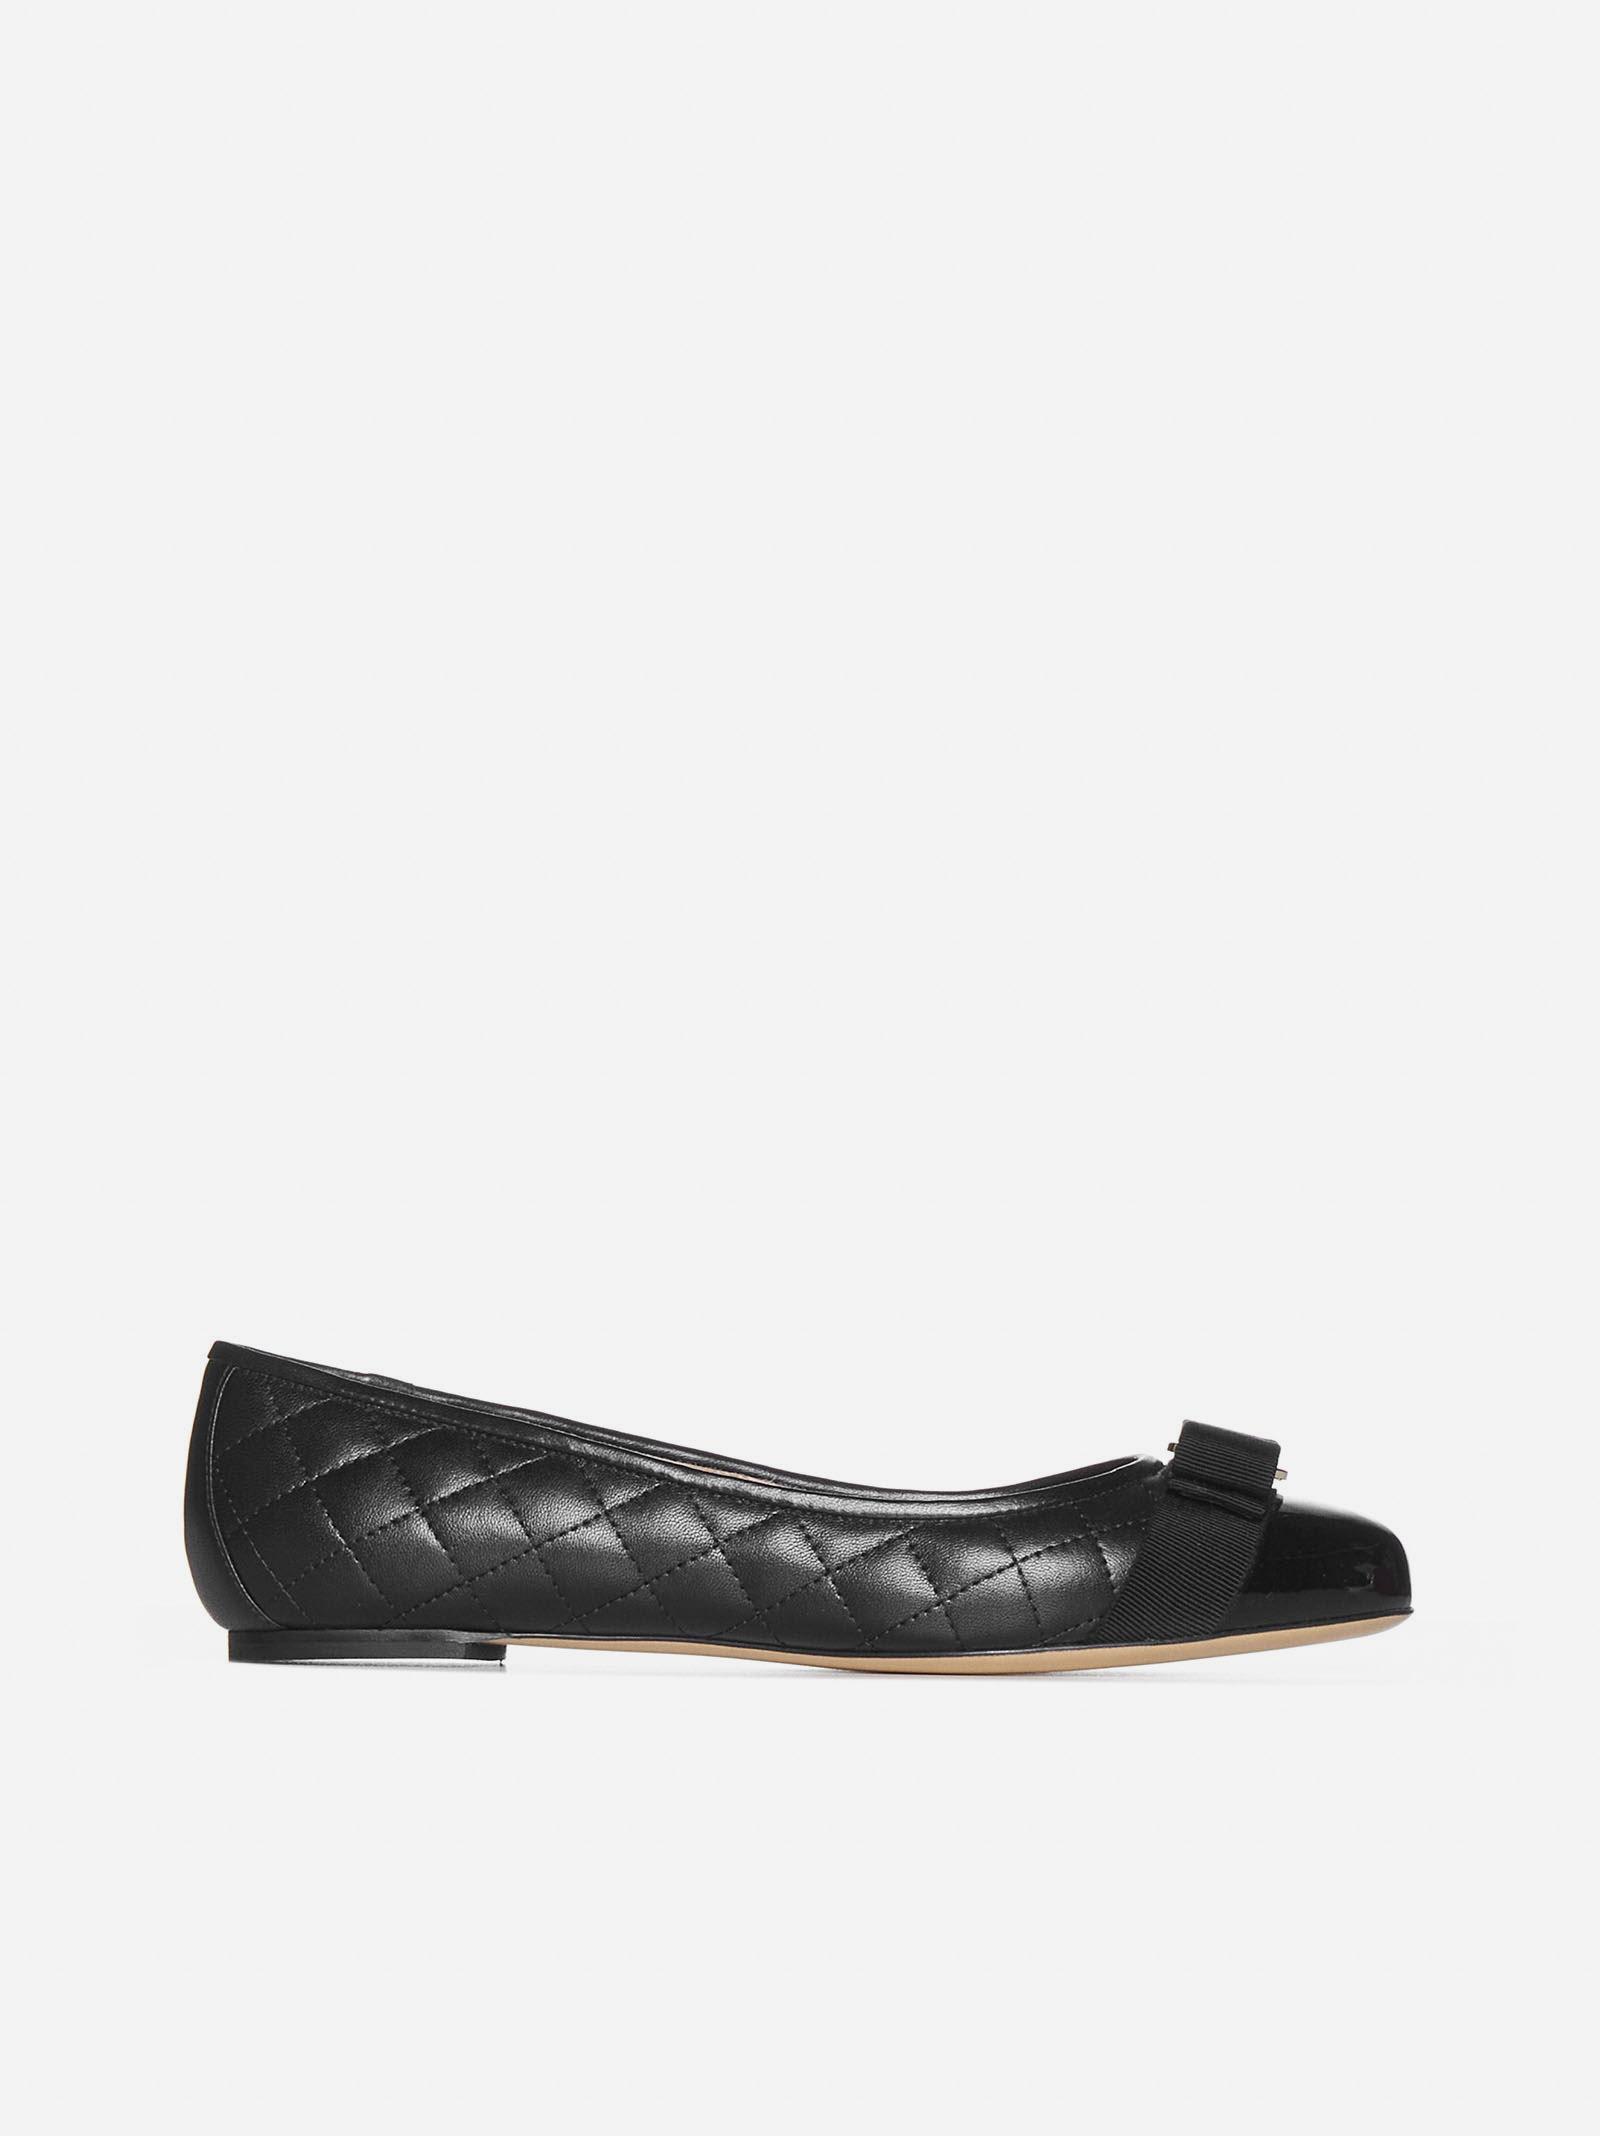 FERRAGAMO VARINA QUILTED NAPPA LEATHER BALLET FLATS